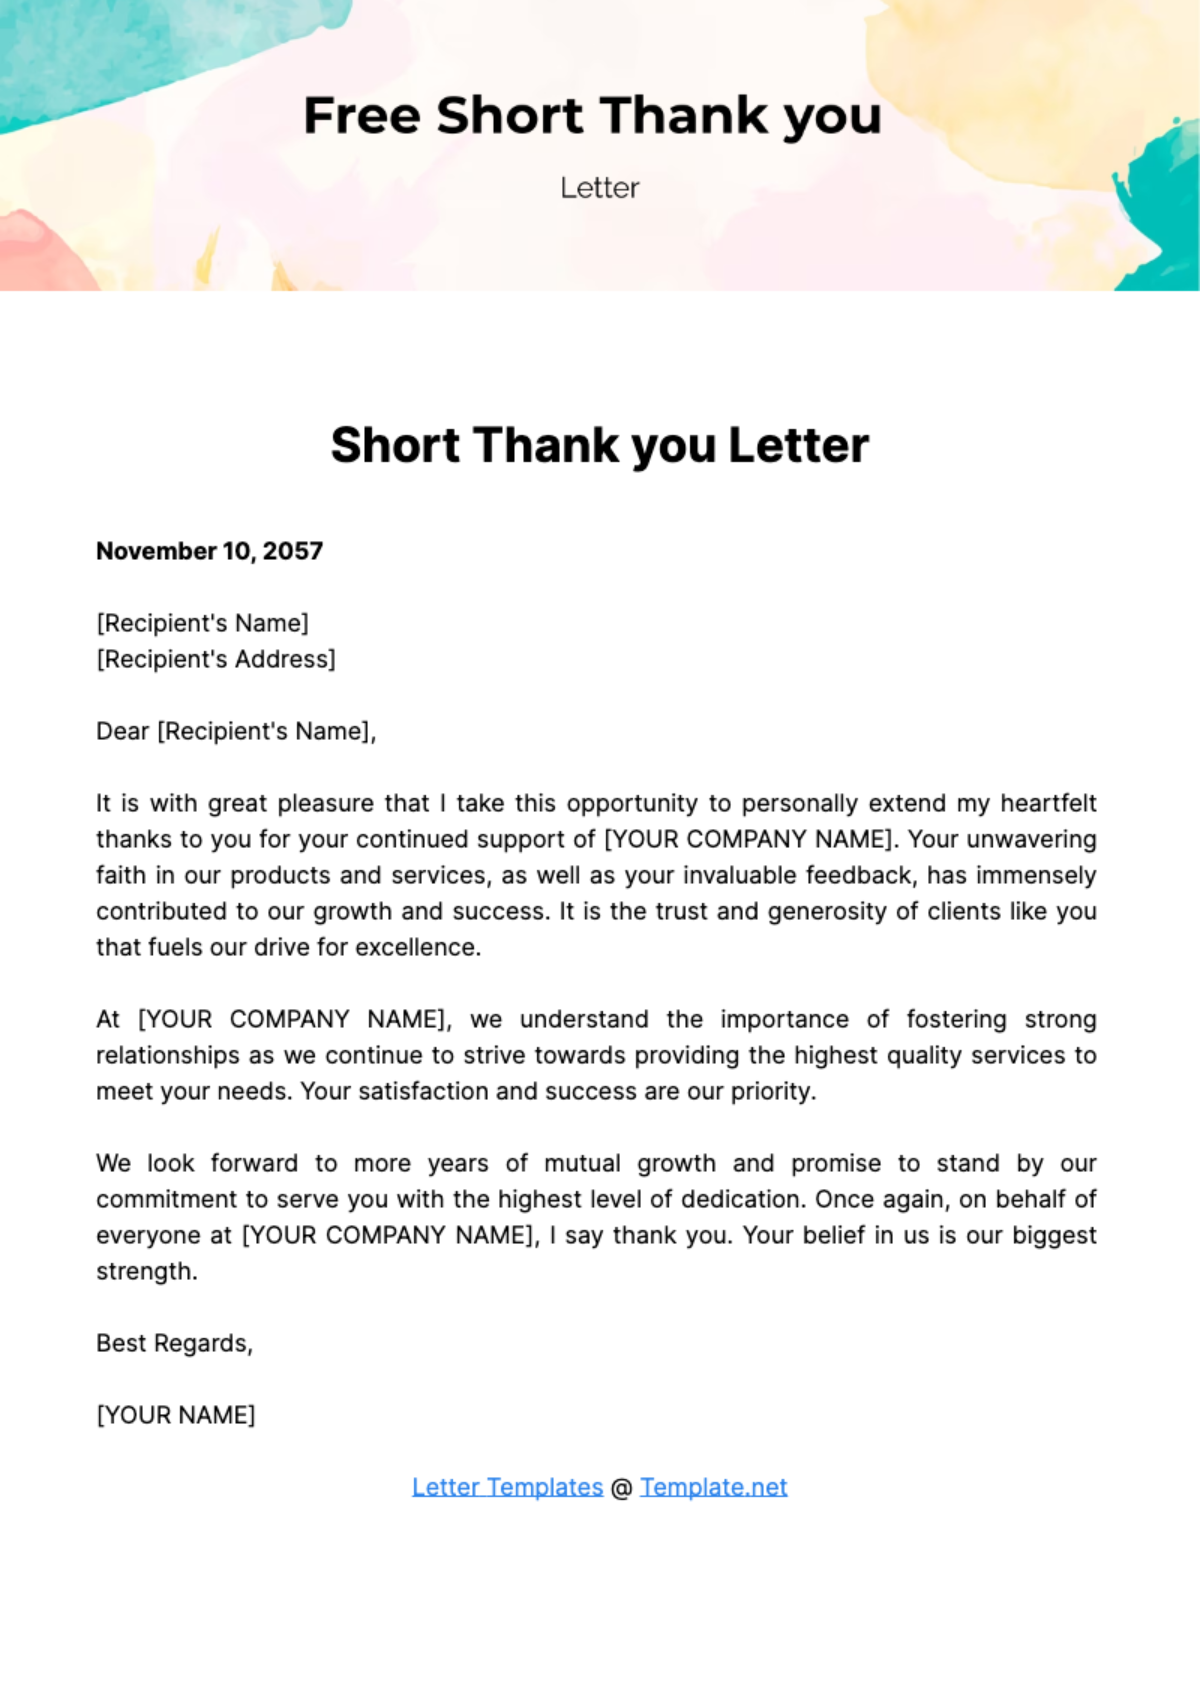 Short Thank you Letter Template